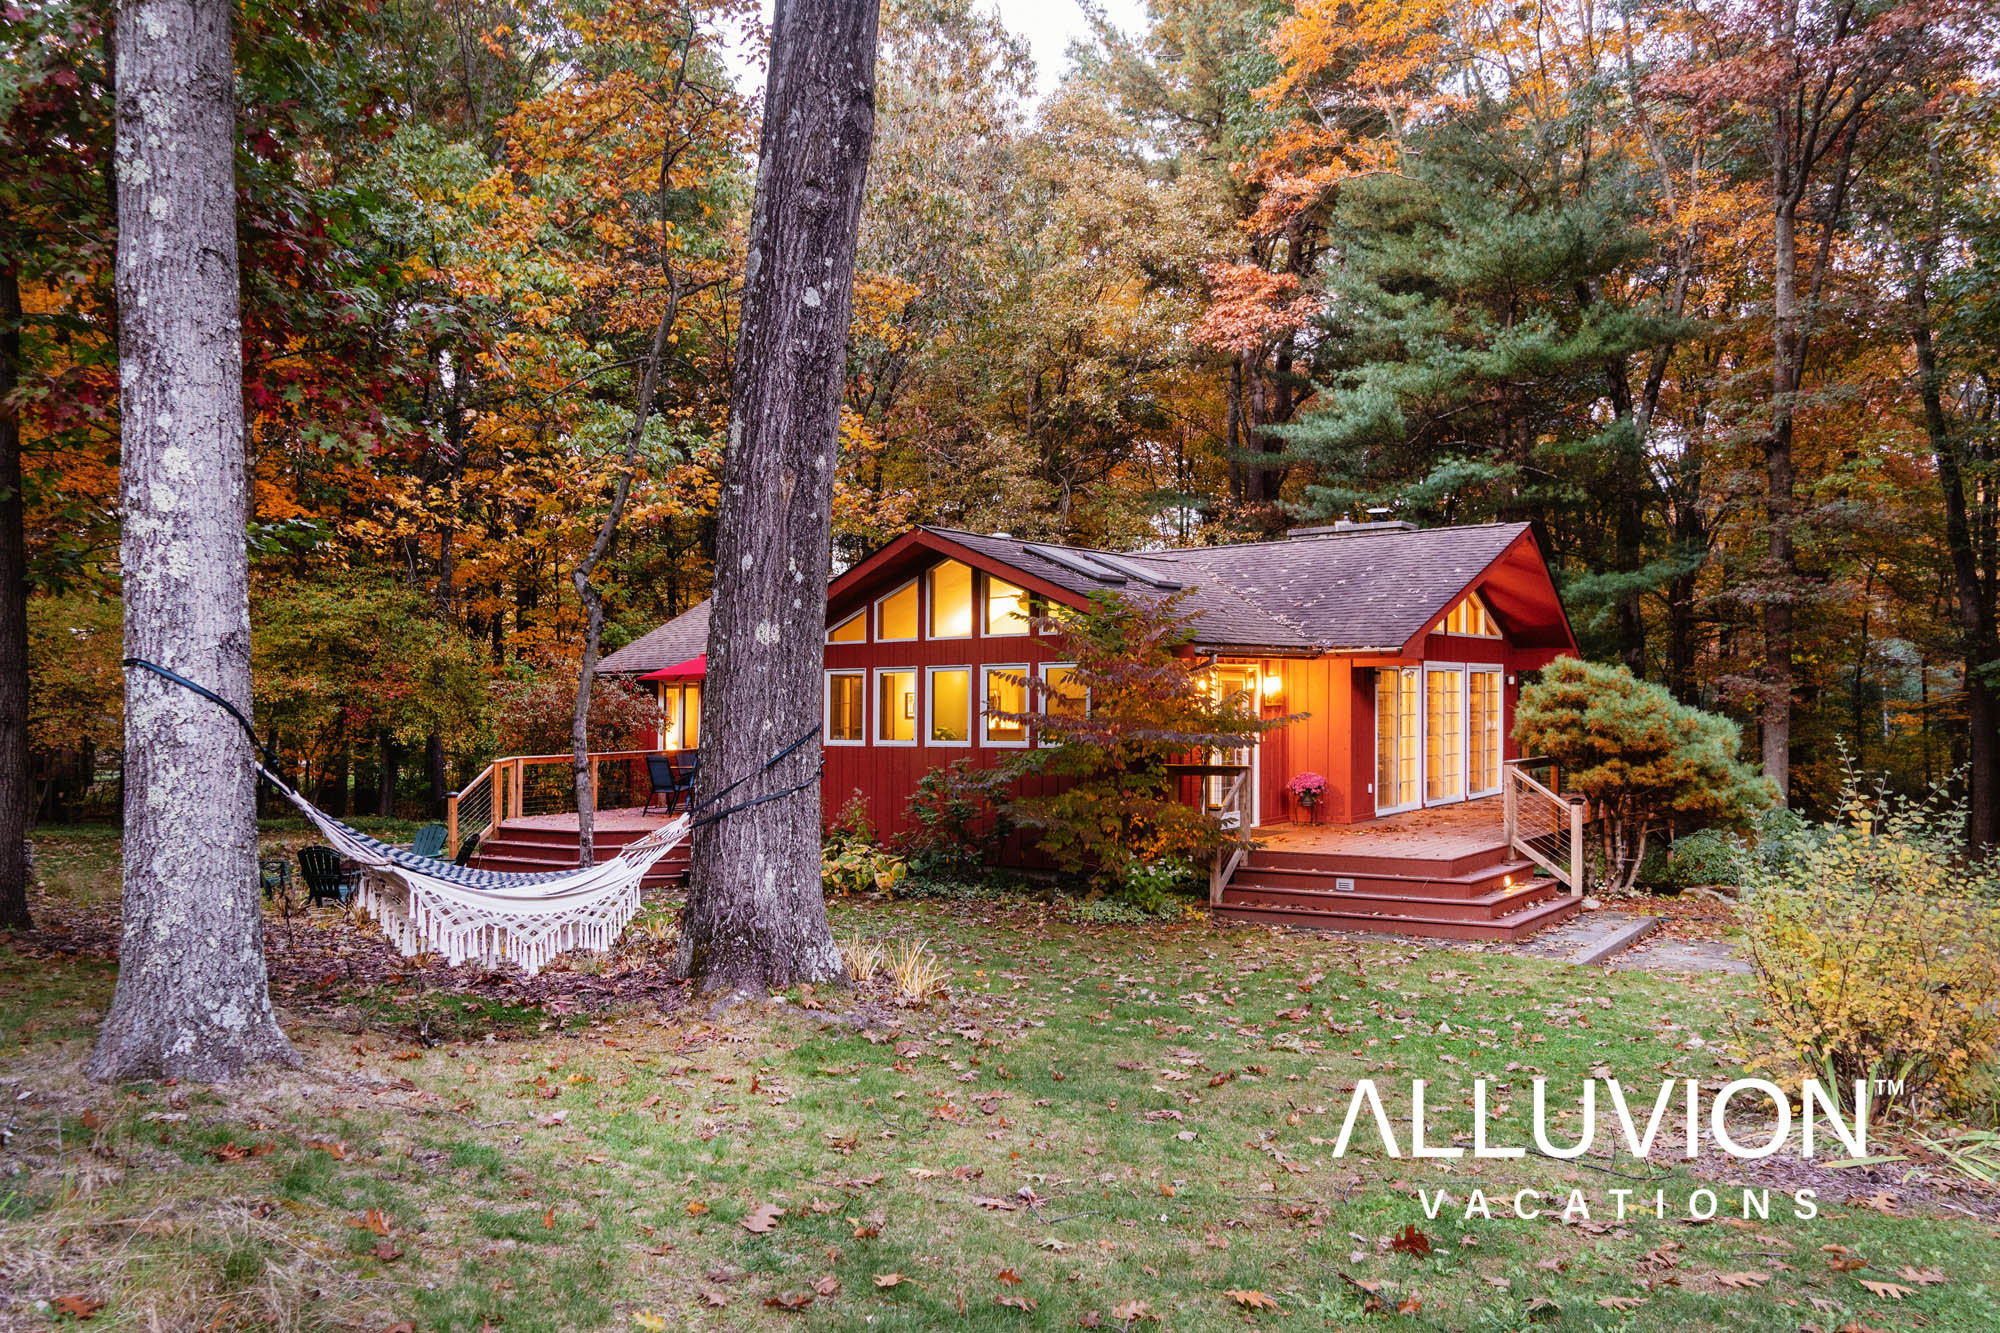 Find serenity at Alluvion Vacations’ Private Getaway Airbnb Cabin near Hudson, NY